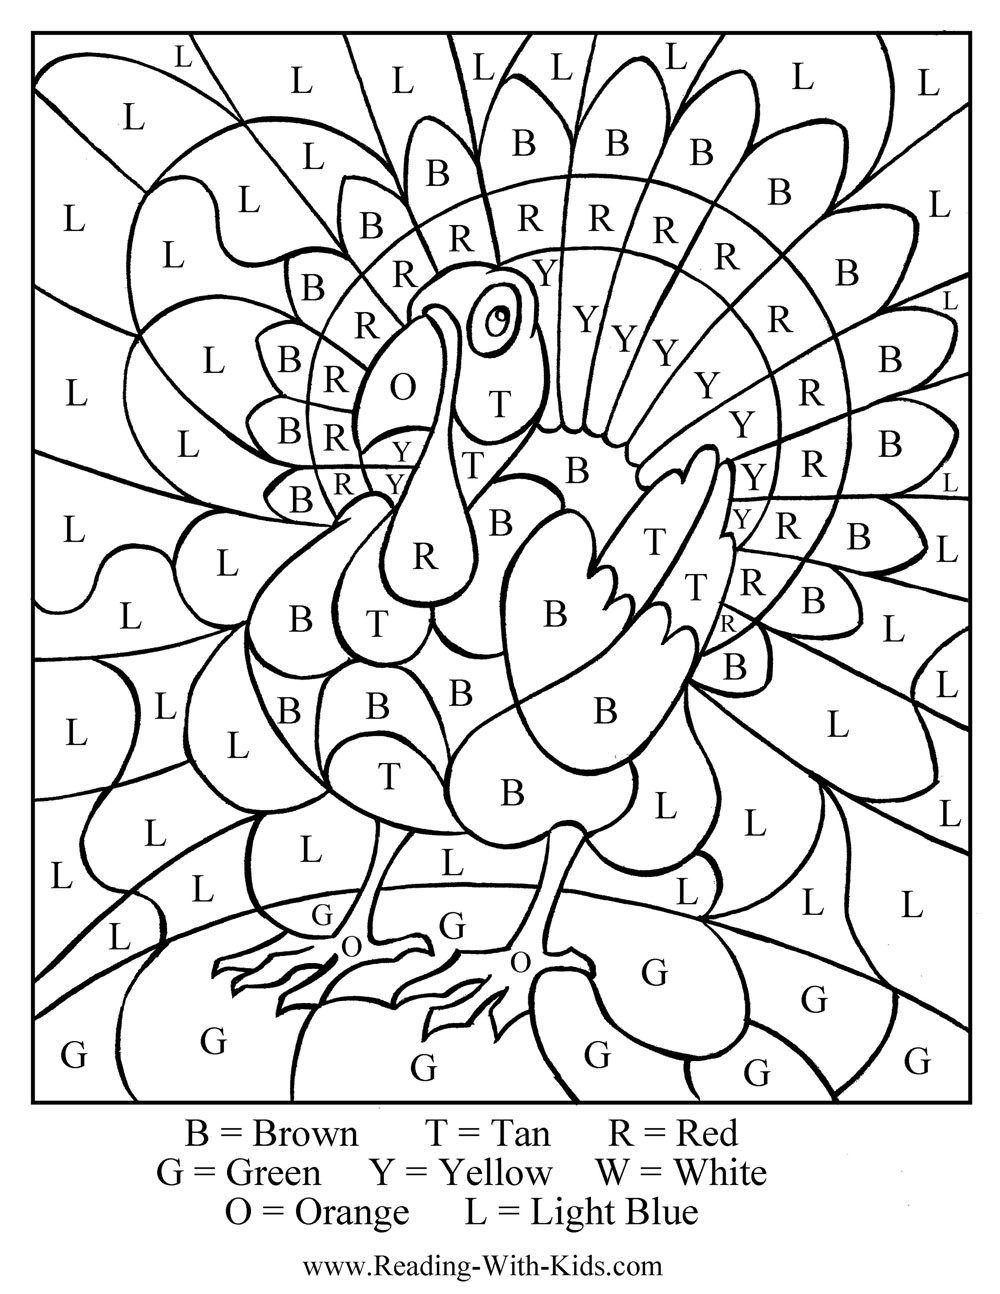 Free Thanksgiving Coloring Pages To Print
 Free Thanksgiving Coloring Pages & Games Printables